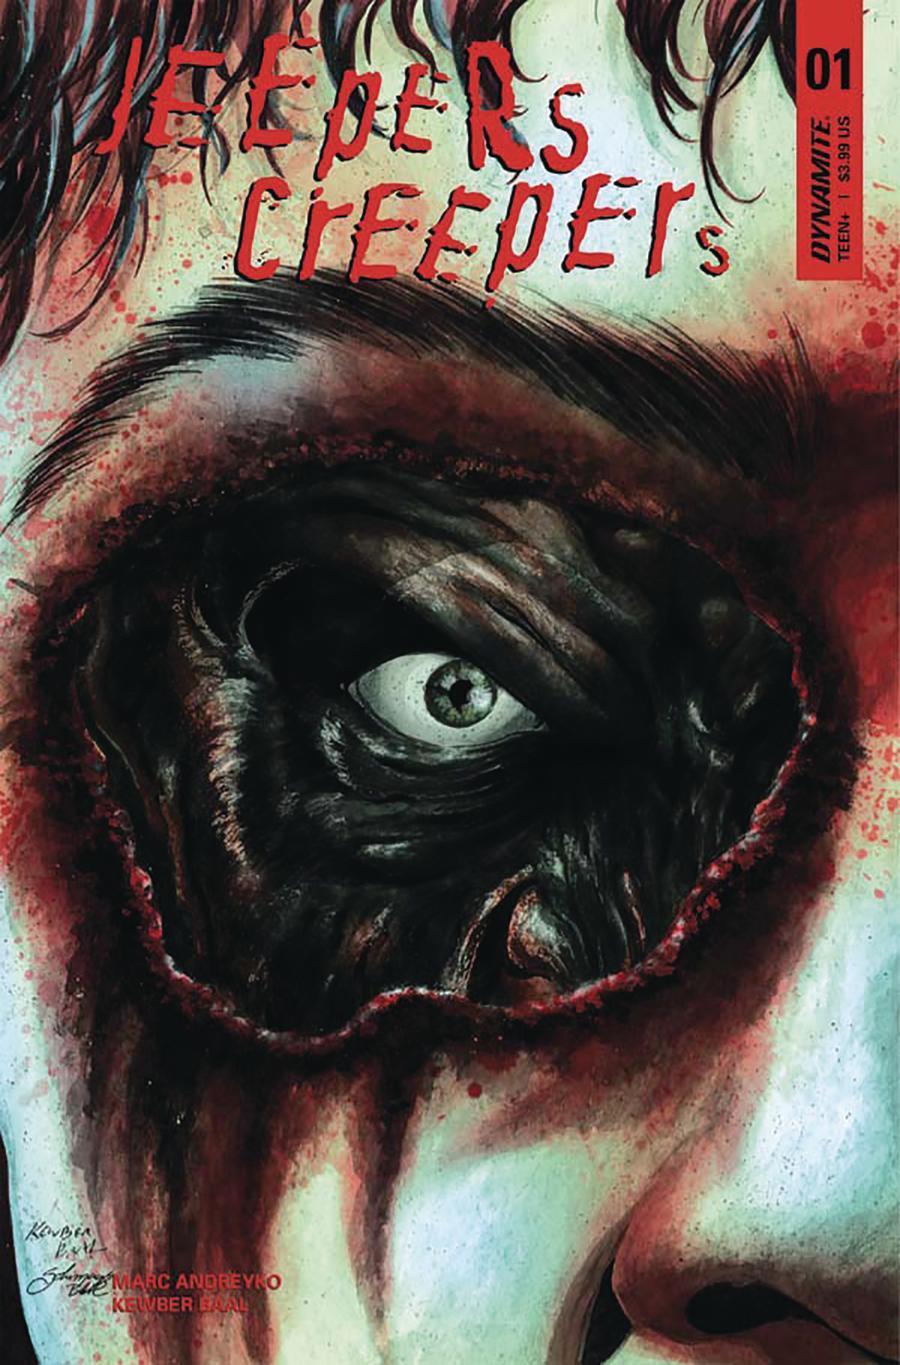 Jeepers Creepers Vol. 1 #1